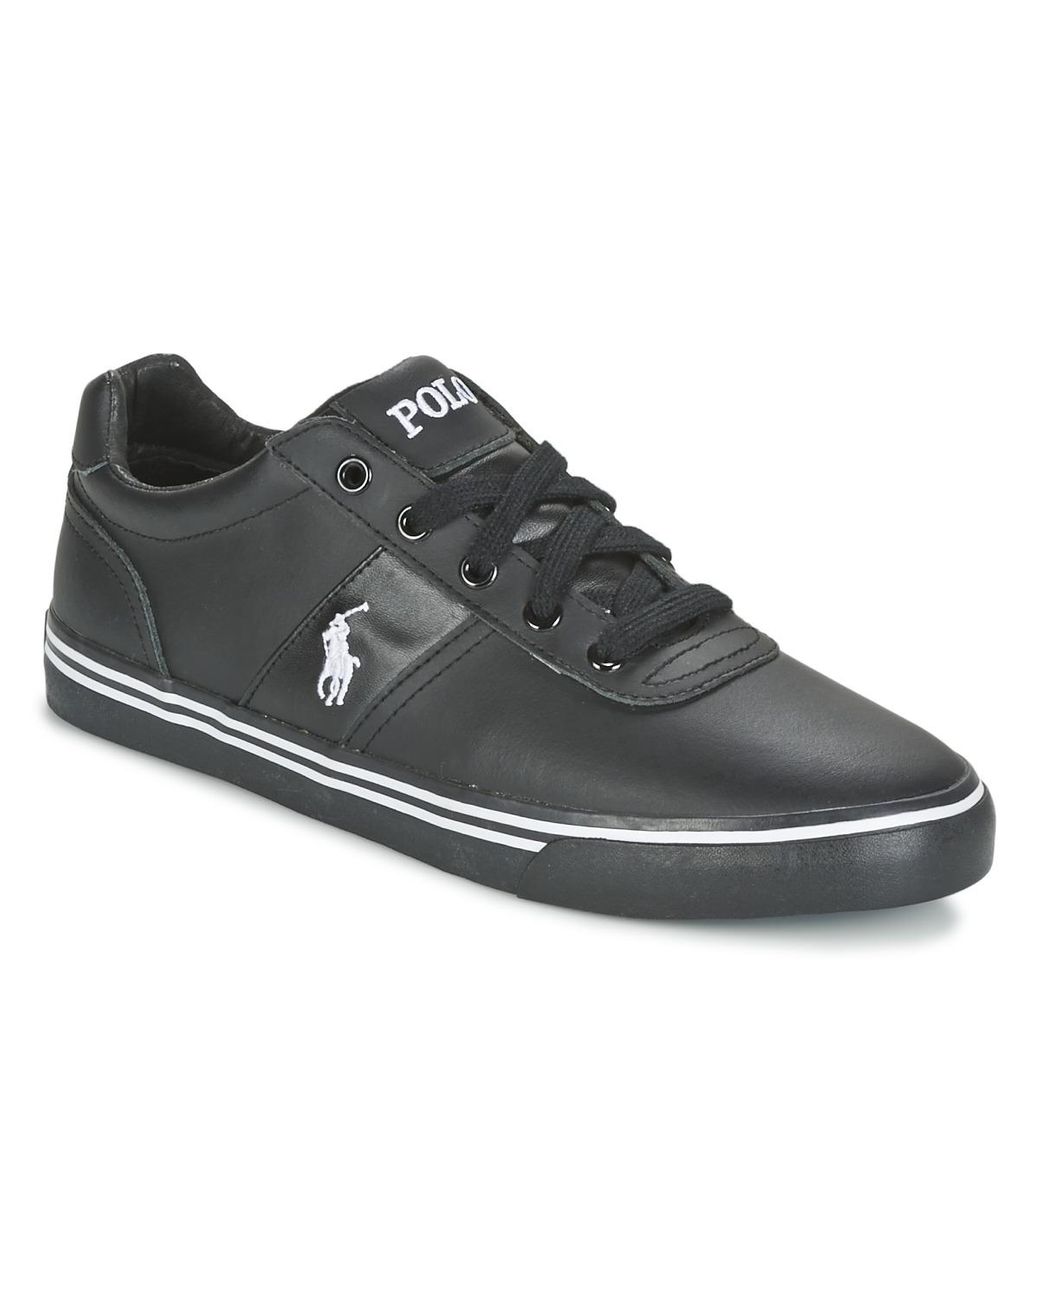 Polo Ralph Lauren Hanford Shoes (trainers) in Black for Men - Save 10% -  Lyst